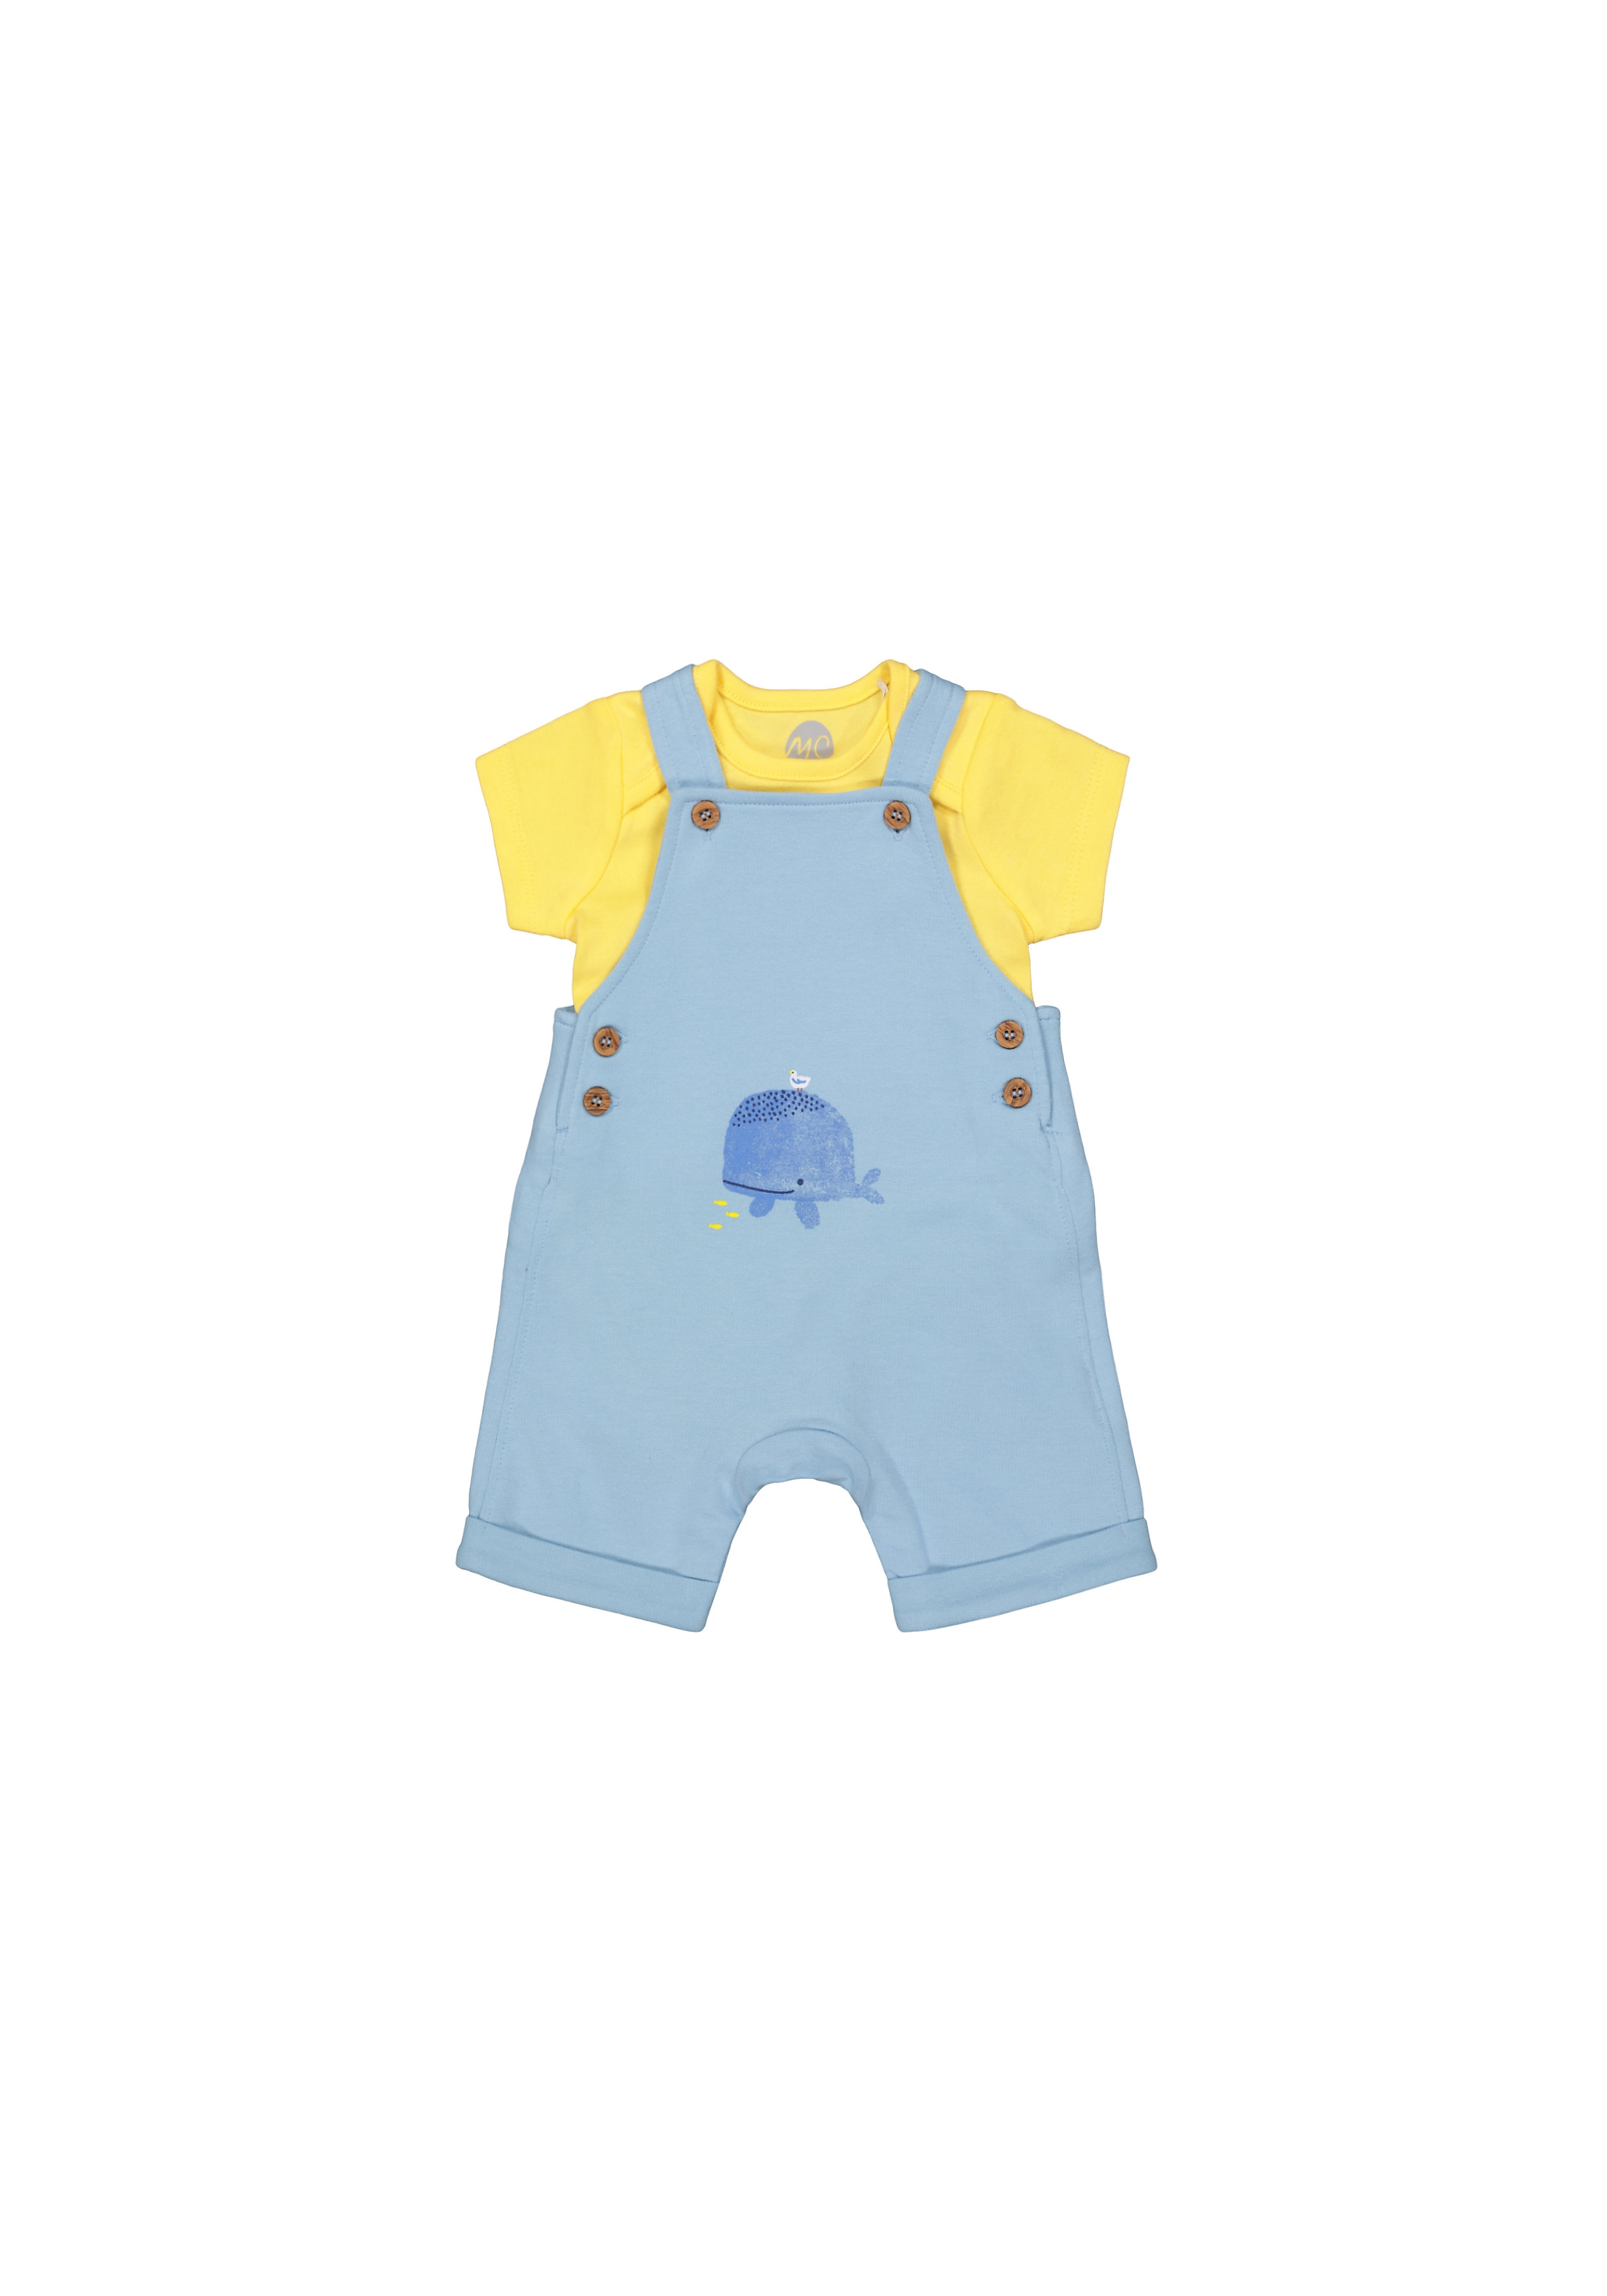 Mothercare | Boys Half Sleeves Dungaree Set Whale Print - Yellow Blue